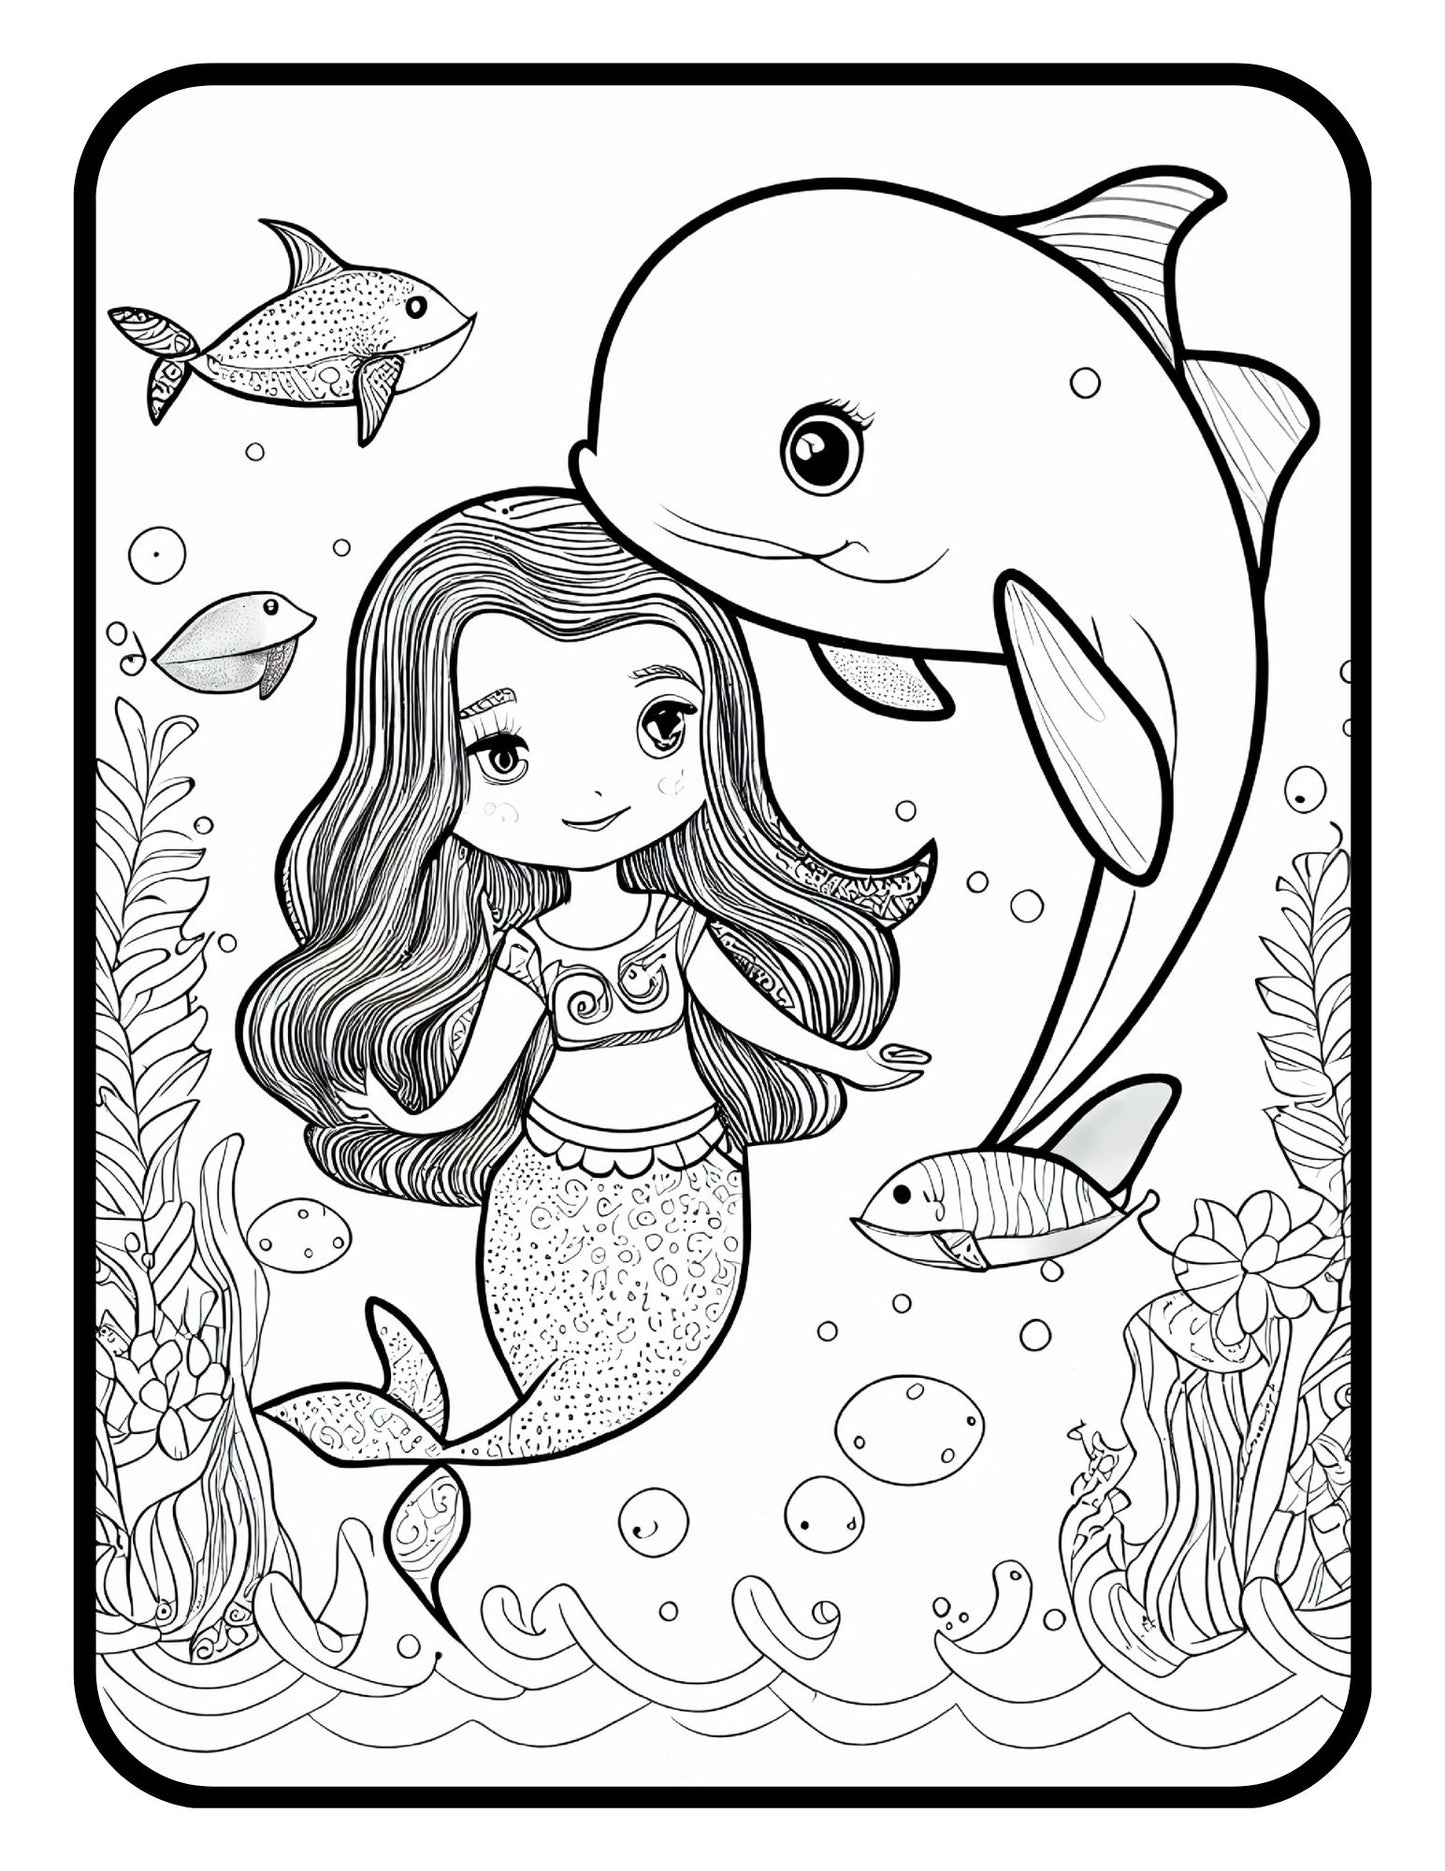 Mermaid Coloring Book for Kids Ages 4-8 Coloring Books Ages 6-8 Mermaid Books for Girls Mermaid Activity Gift Book for Kids Coloring Book